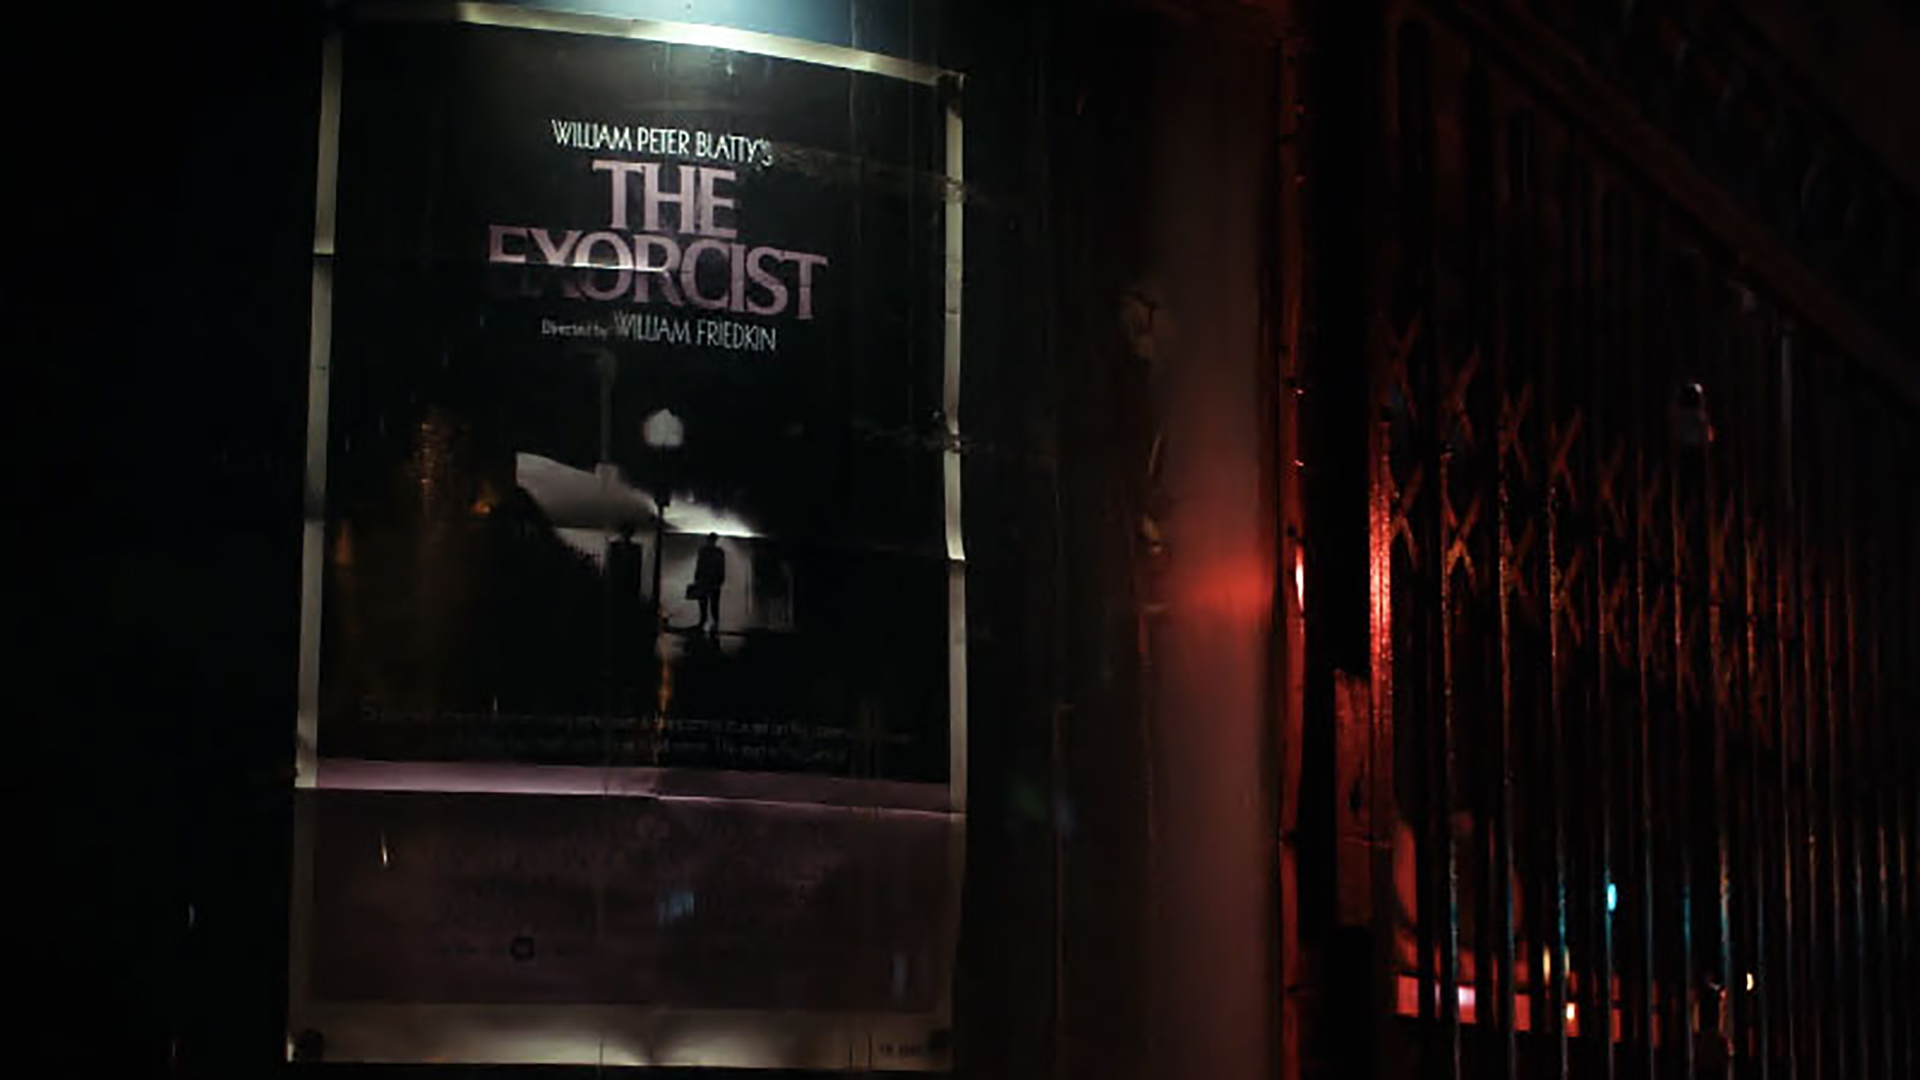 The Exorcist, The Exorcist film itself could be evil., TV-MA, Season 1028405, Episode 1